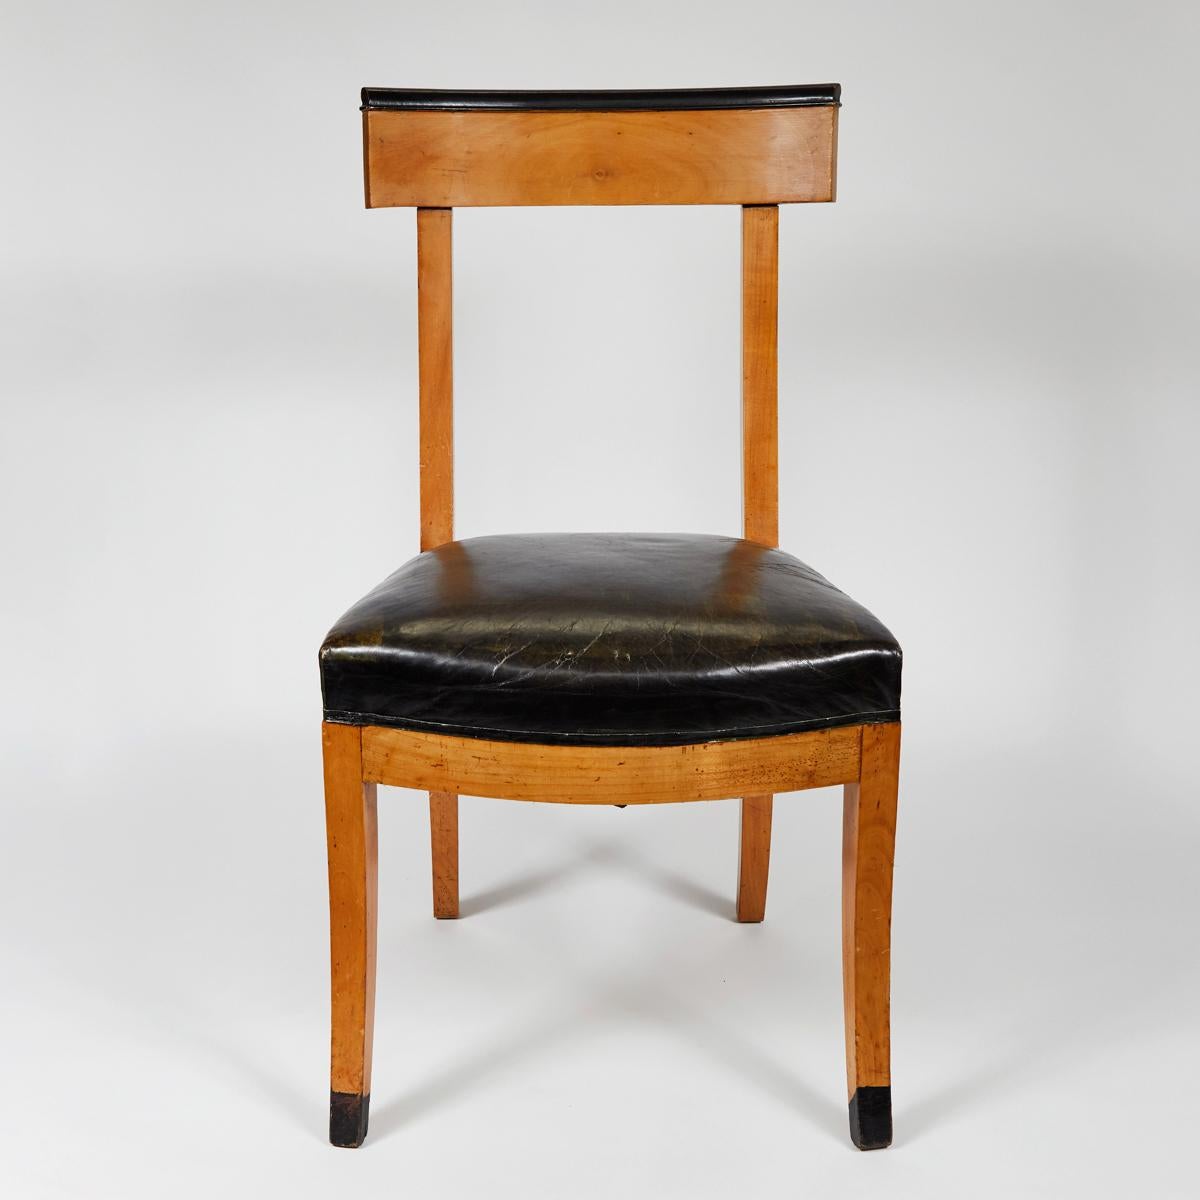 1900s French dining chairs with upholstered black leather seats. The elegant chairs are accented with ebonized back crest rails and black leather seats on saber legs.